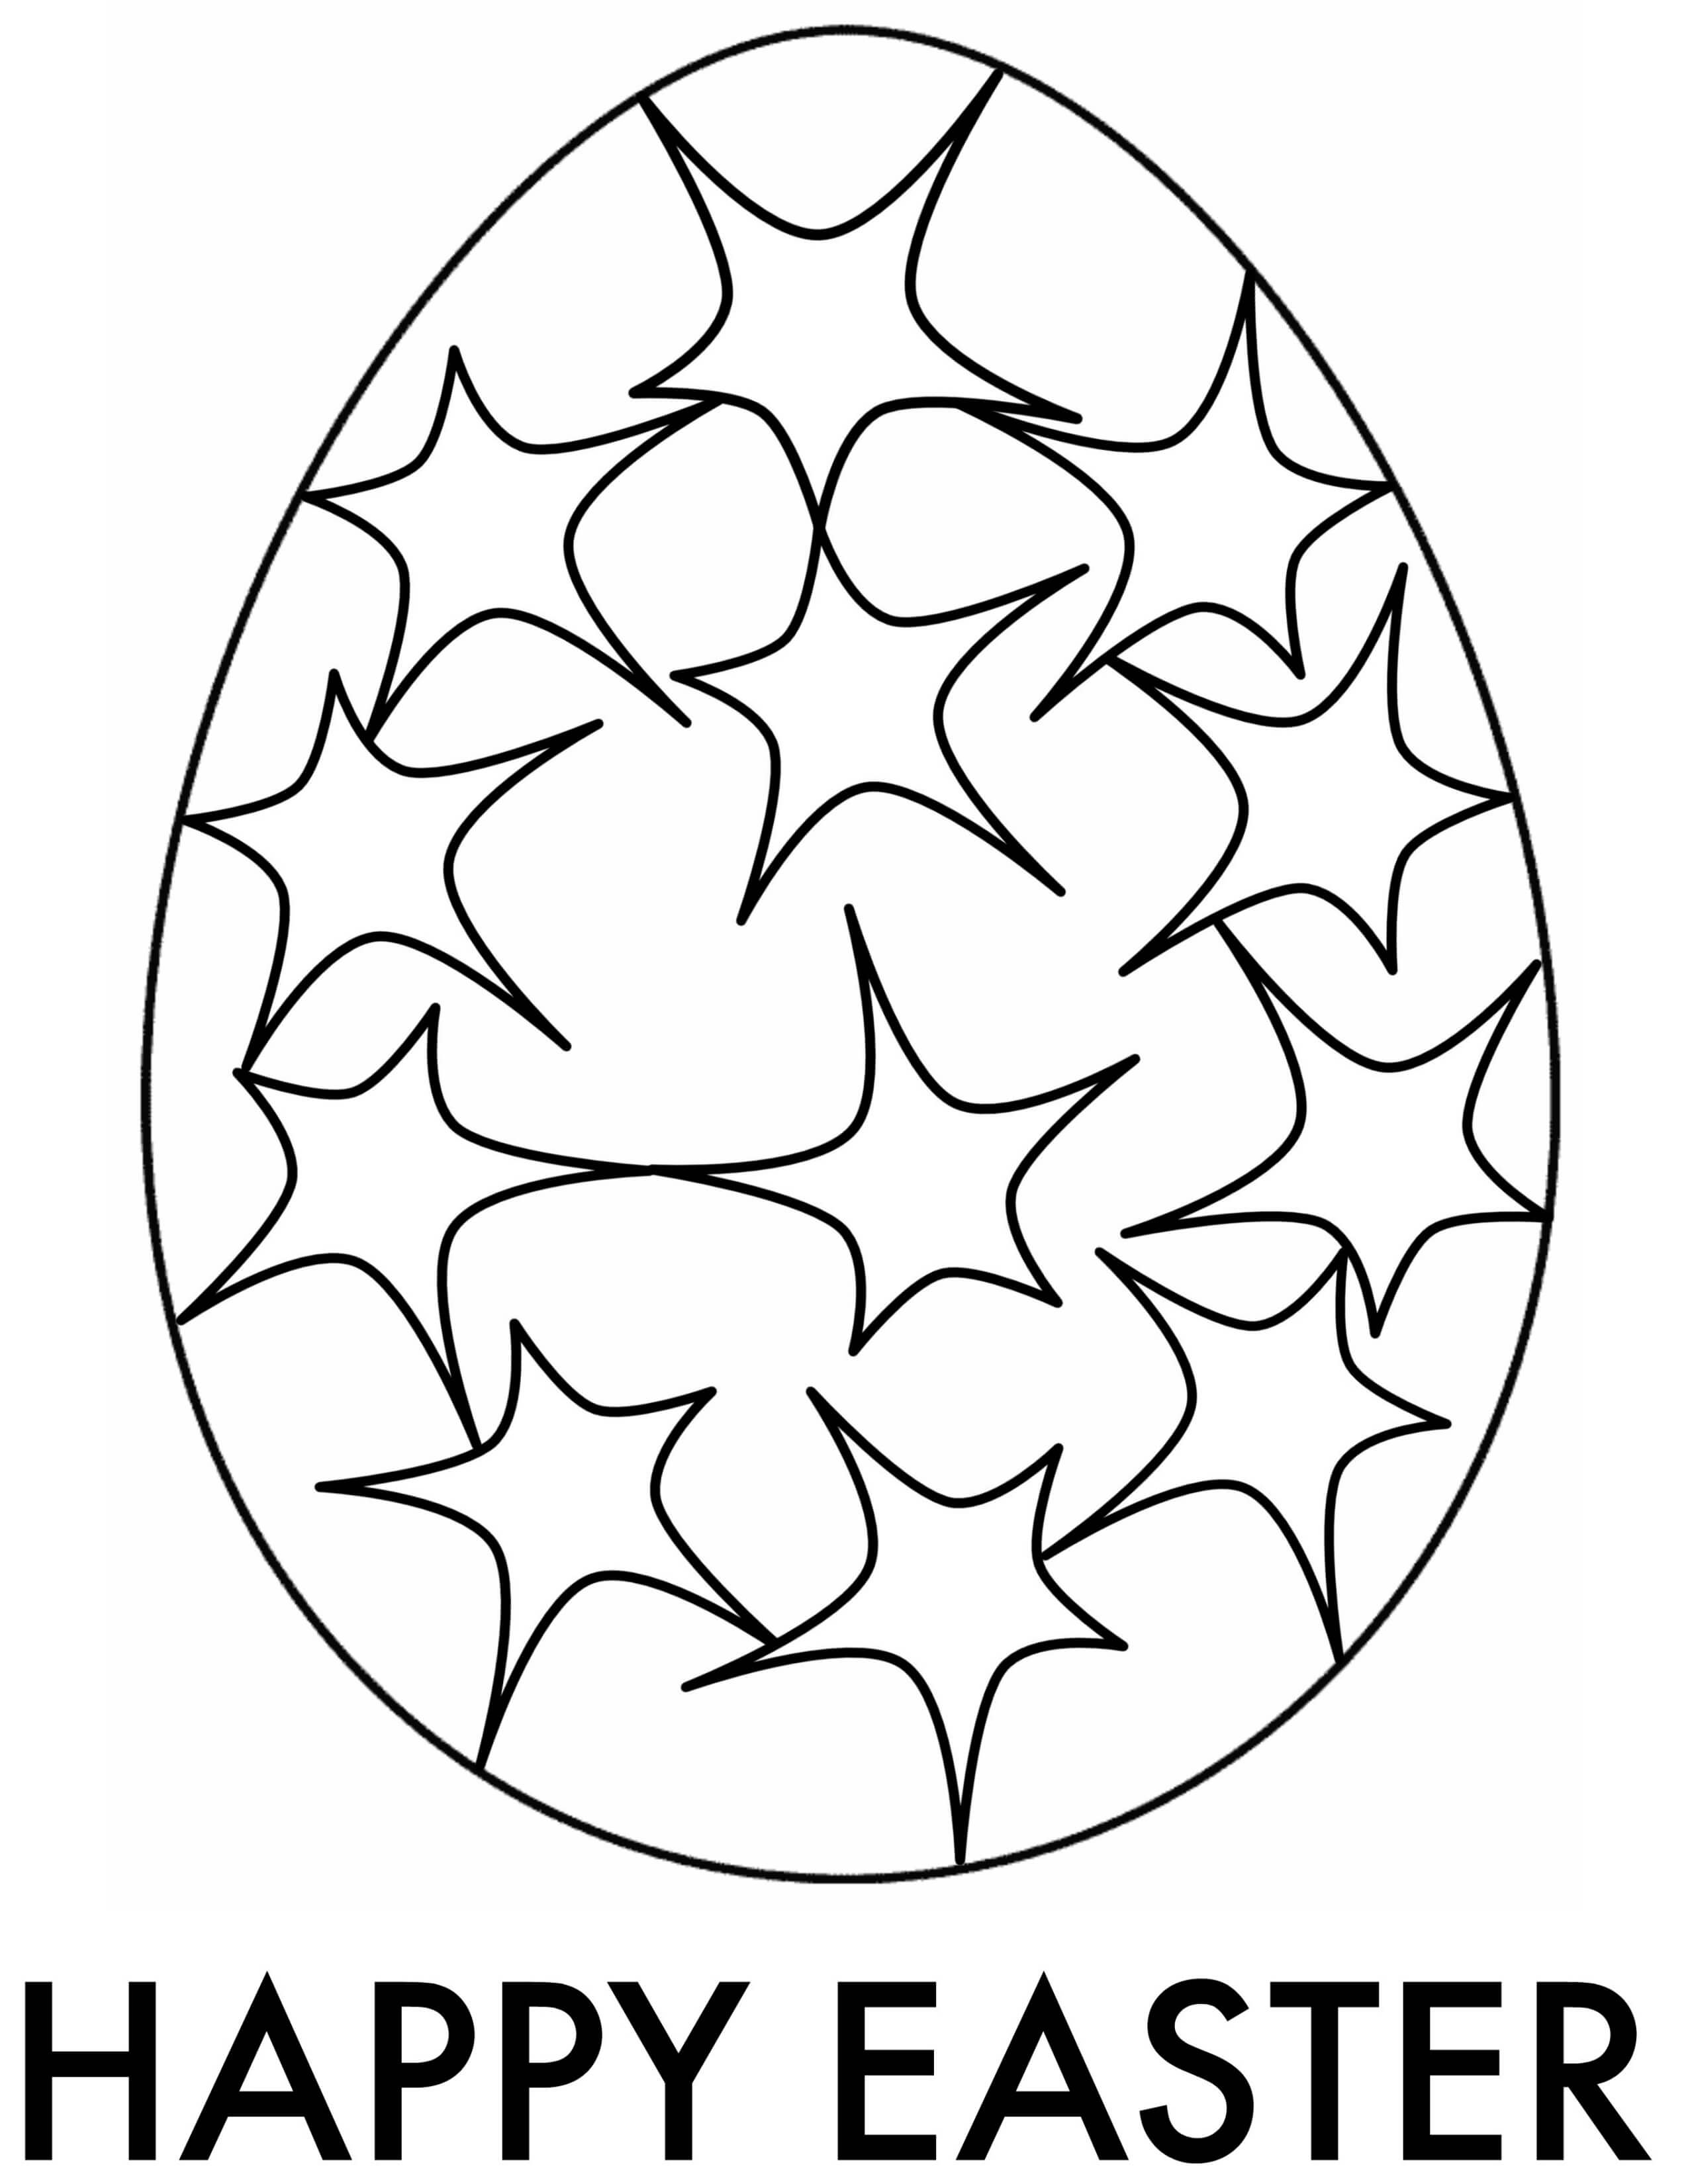 Easter Adult Coloring Pages | Free Printable Downloads